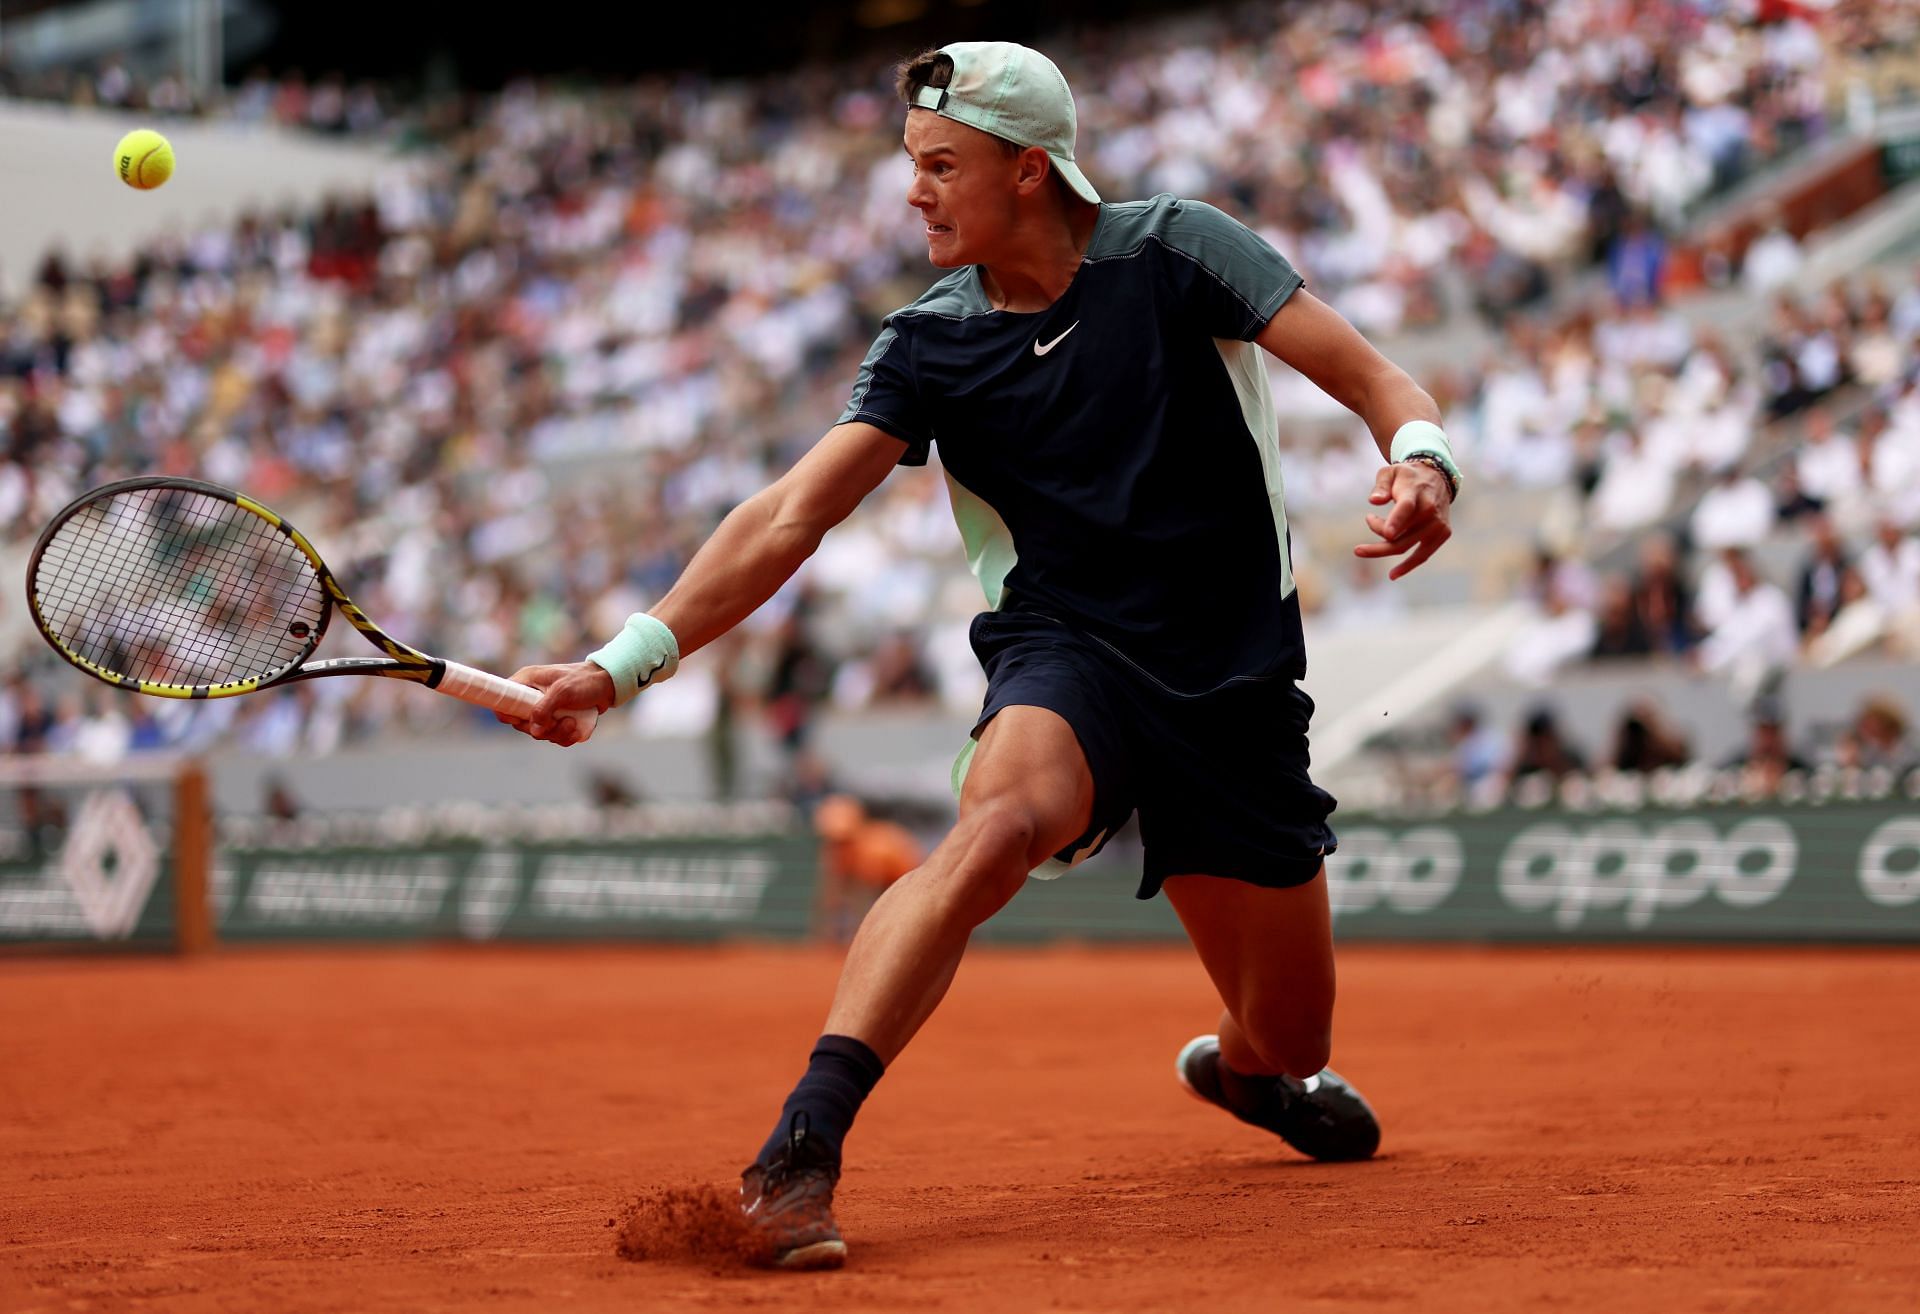 Rune was playing in his maiden Grand Slam quarterfinal at the 2022 French Open.